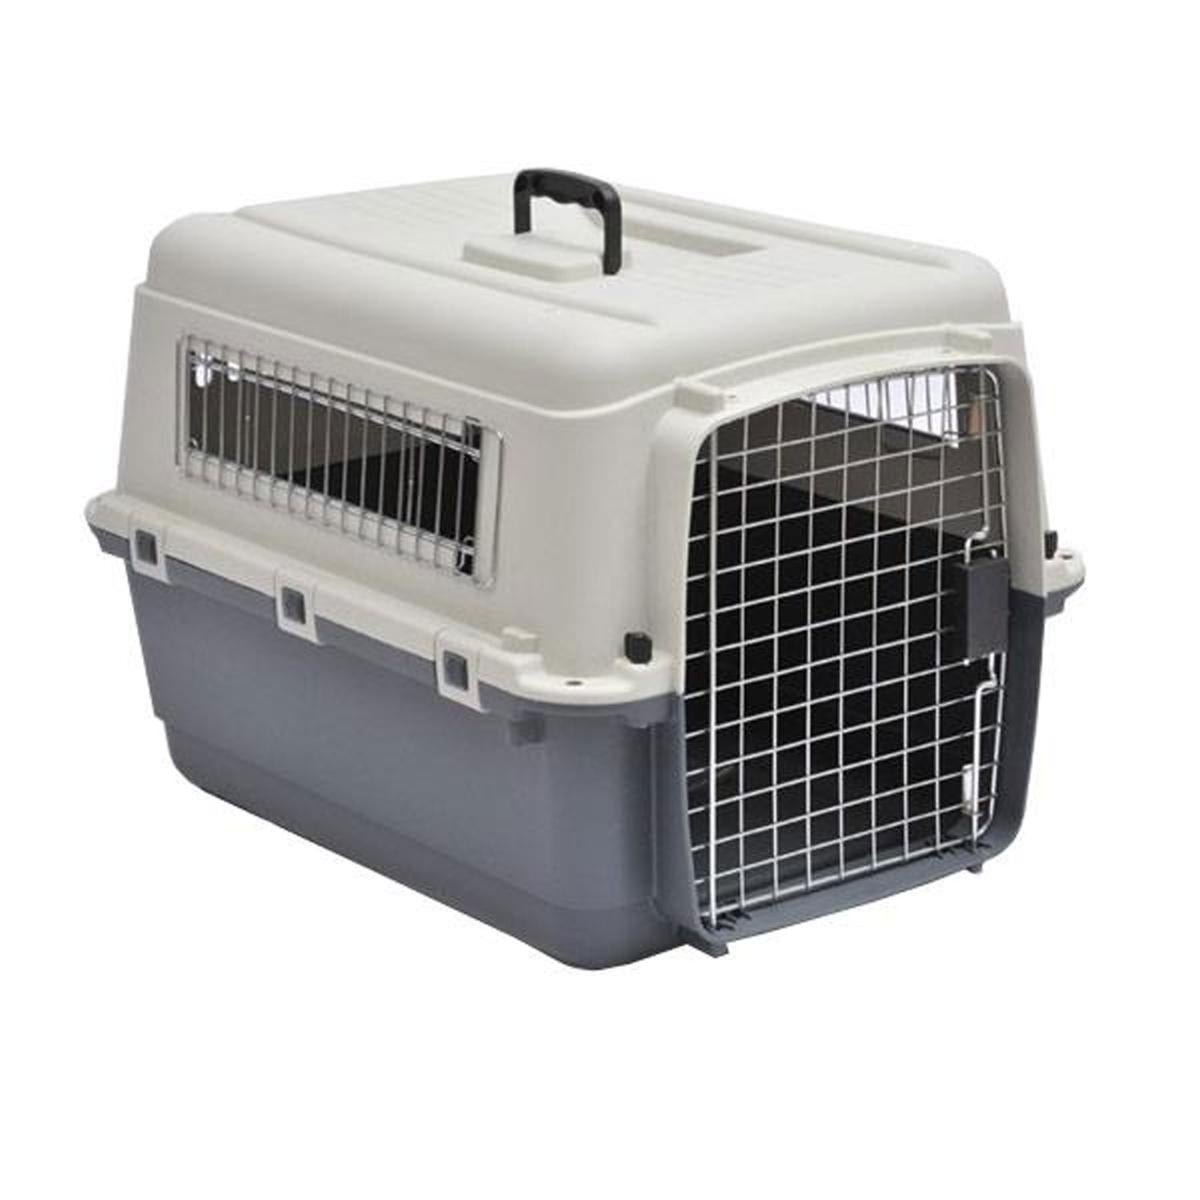 Petmode Aviation Dog Carrier Plastic